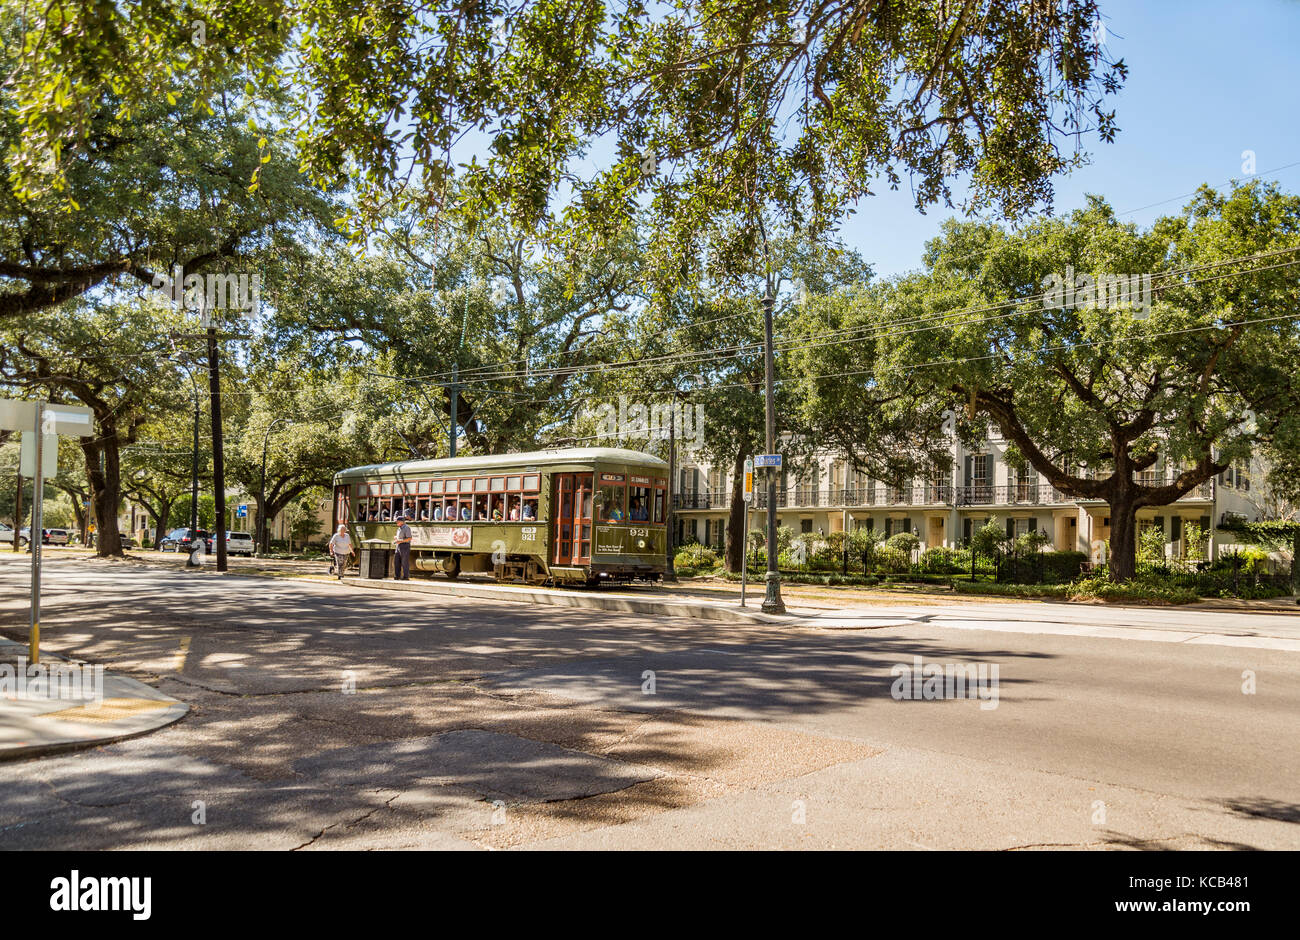 NEW ORLEANS, USA - OCTOBER 17: New Orleans Streetcar Line, on October 17, 2016. Newly revamped after Hurricane Katrina in 2005, the New Orleans Street Stock Photo